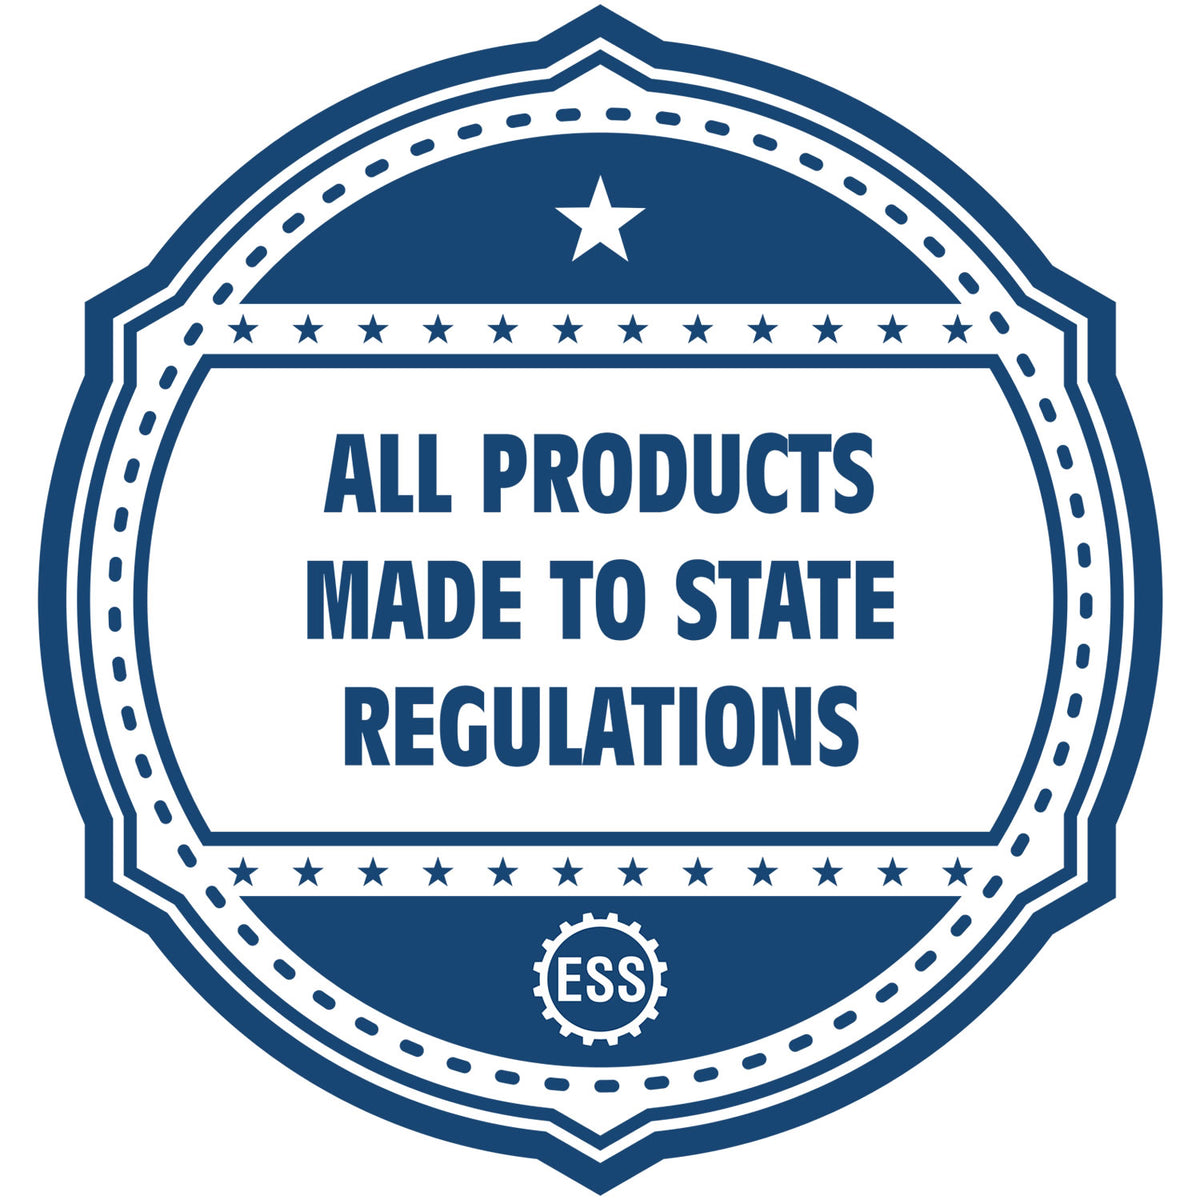 An icon or badge element for the Long Reach Mississippi PE Seal showing that this product is made in compliance with state regulations.